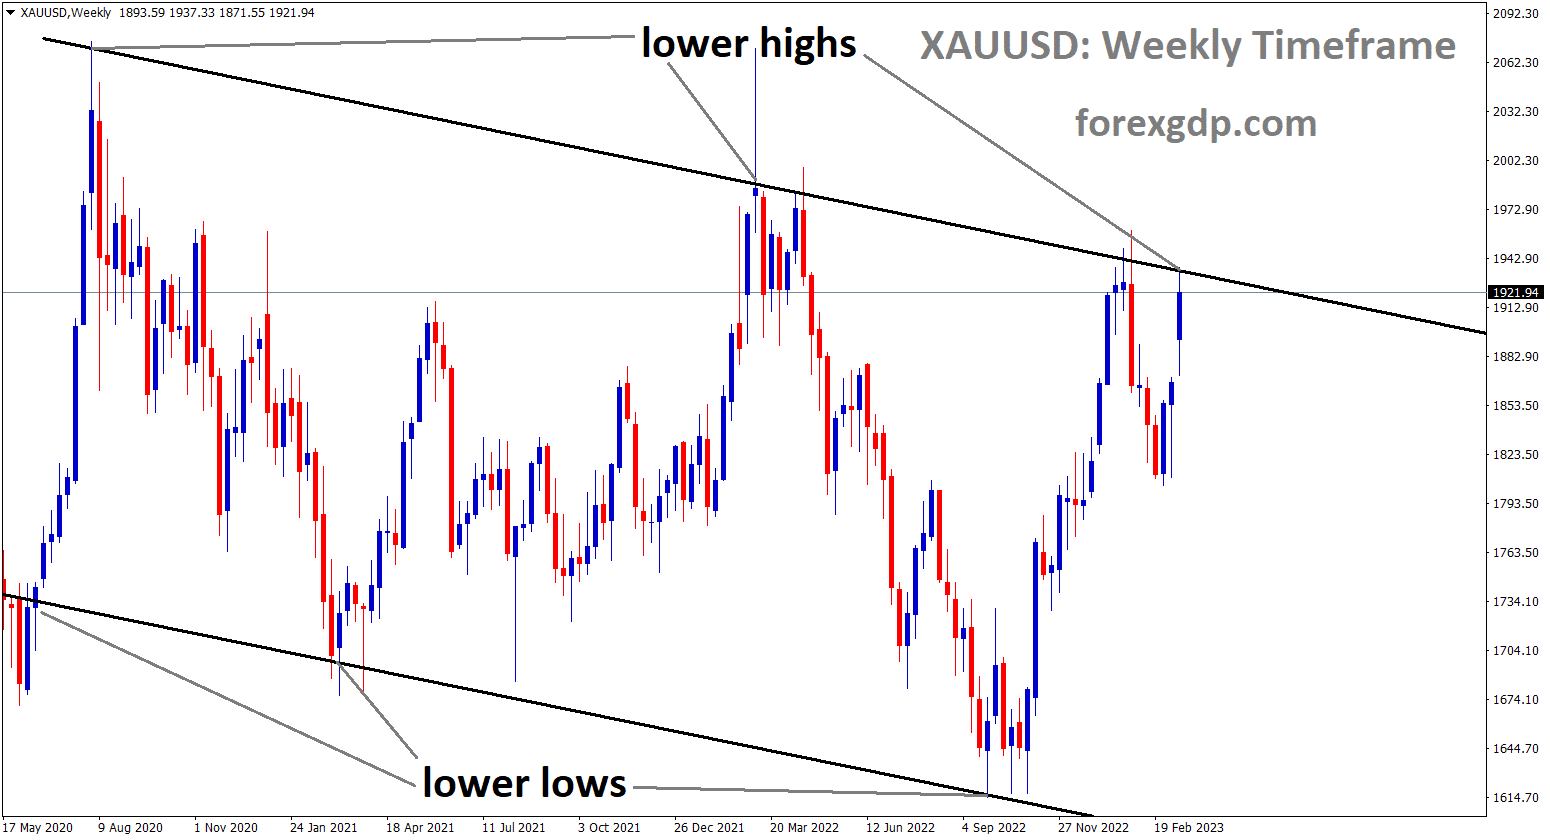 XAUUSD is moving in Descending channel and the market has reached the lower high area of the channel. 2